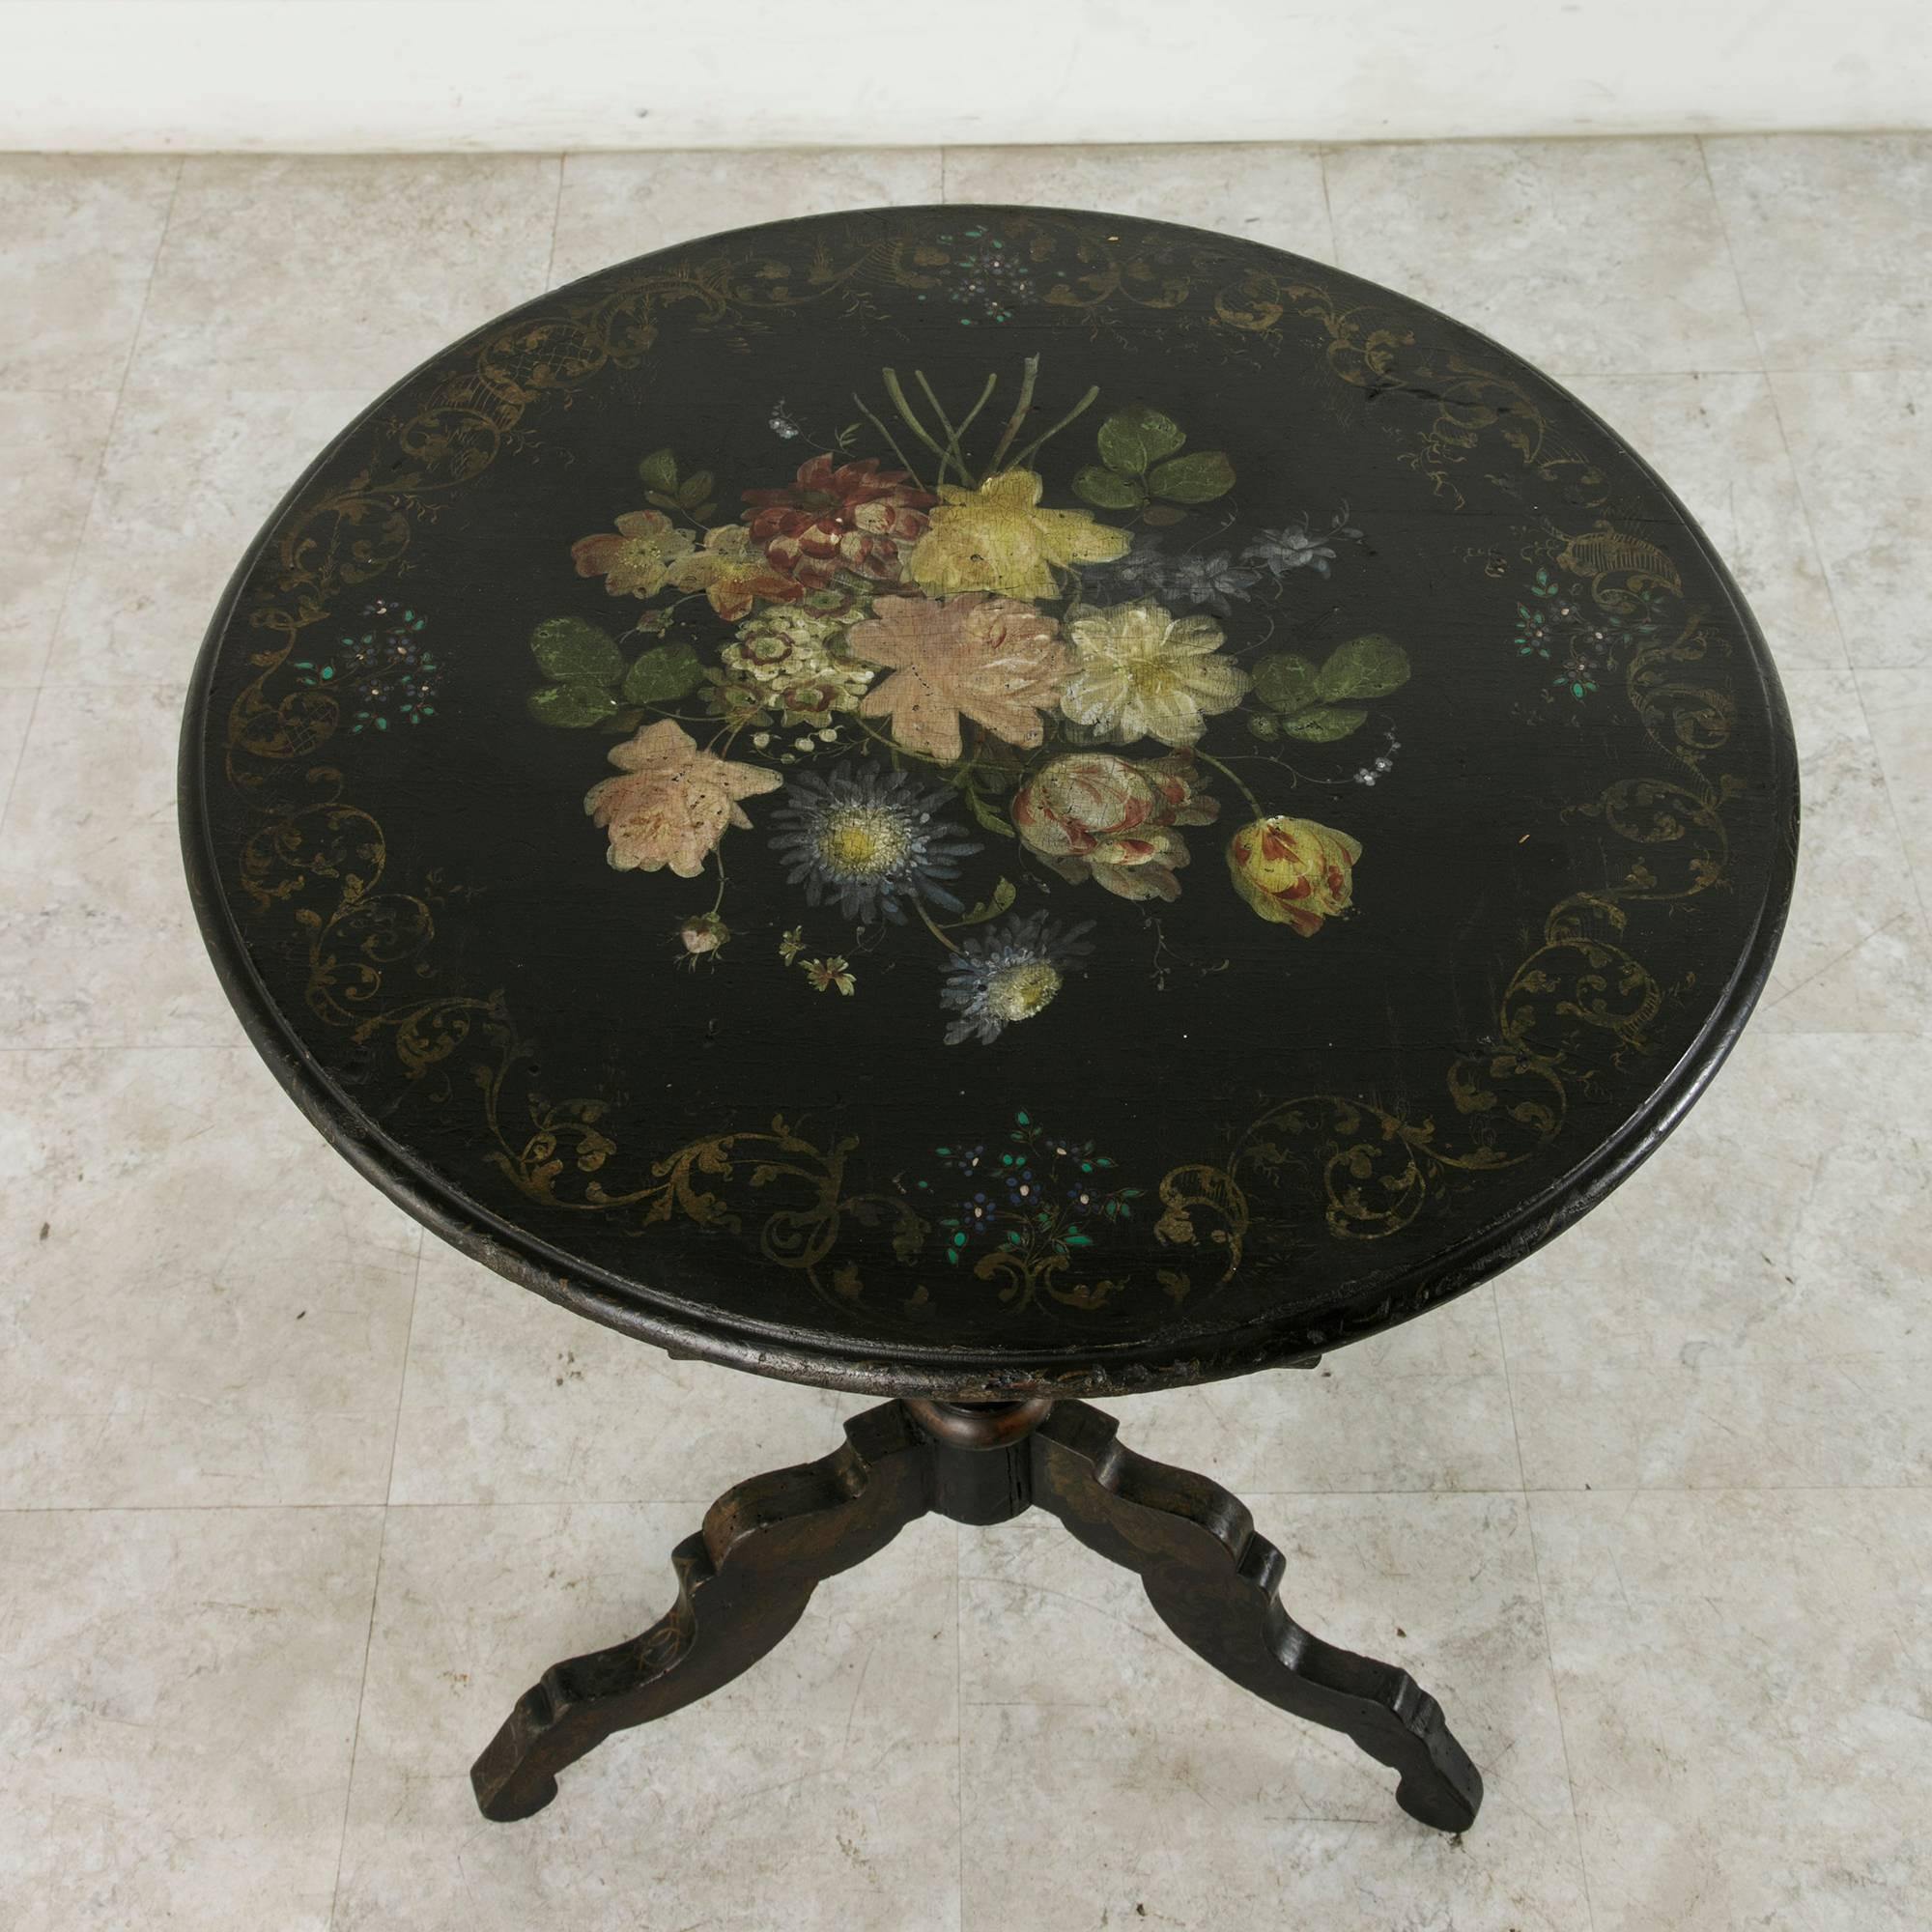 A lovely bouquet covers the top of this hand-painted Napoleon III period pedestal table, while elegant gold scroll work travels around its edge and down the turned pedestal base. A skillfully painted piece, it has aged beautifully and will lend a